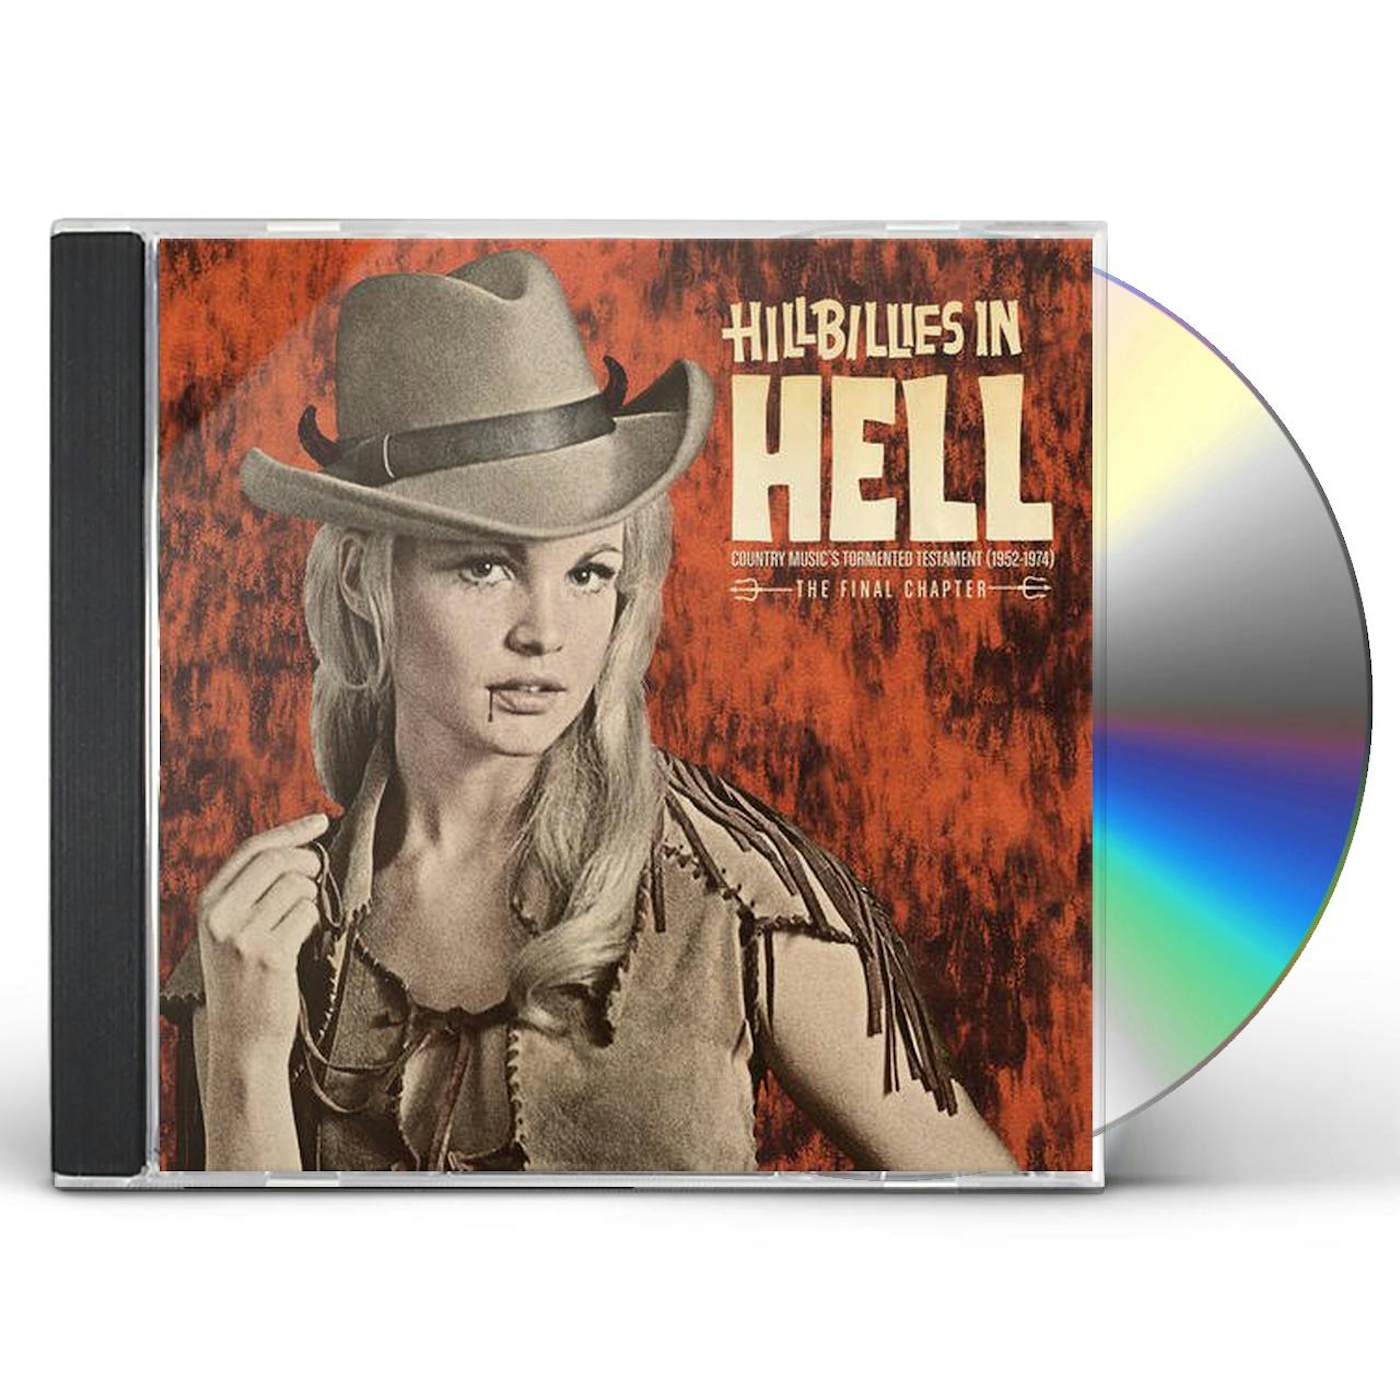 HILLBILLIES IN HELL: COUNTRY MUSIC'S TORMENTED CD